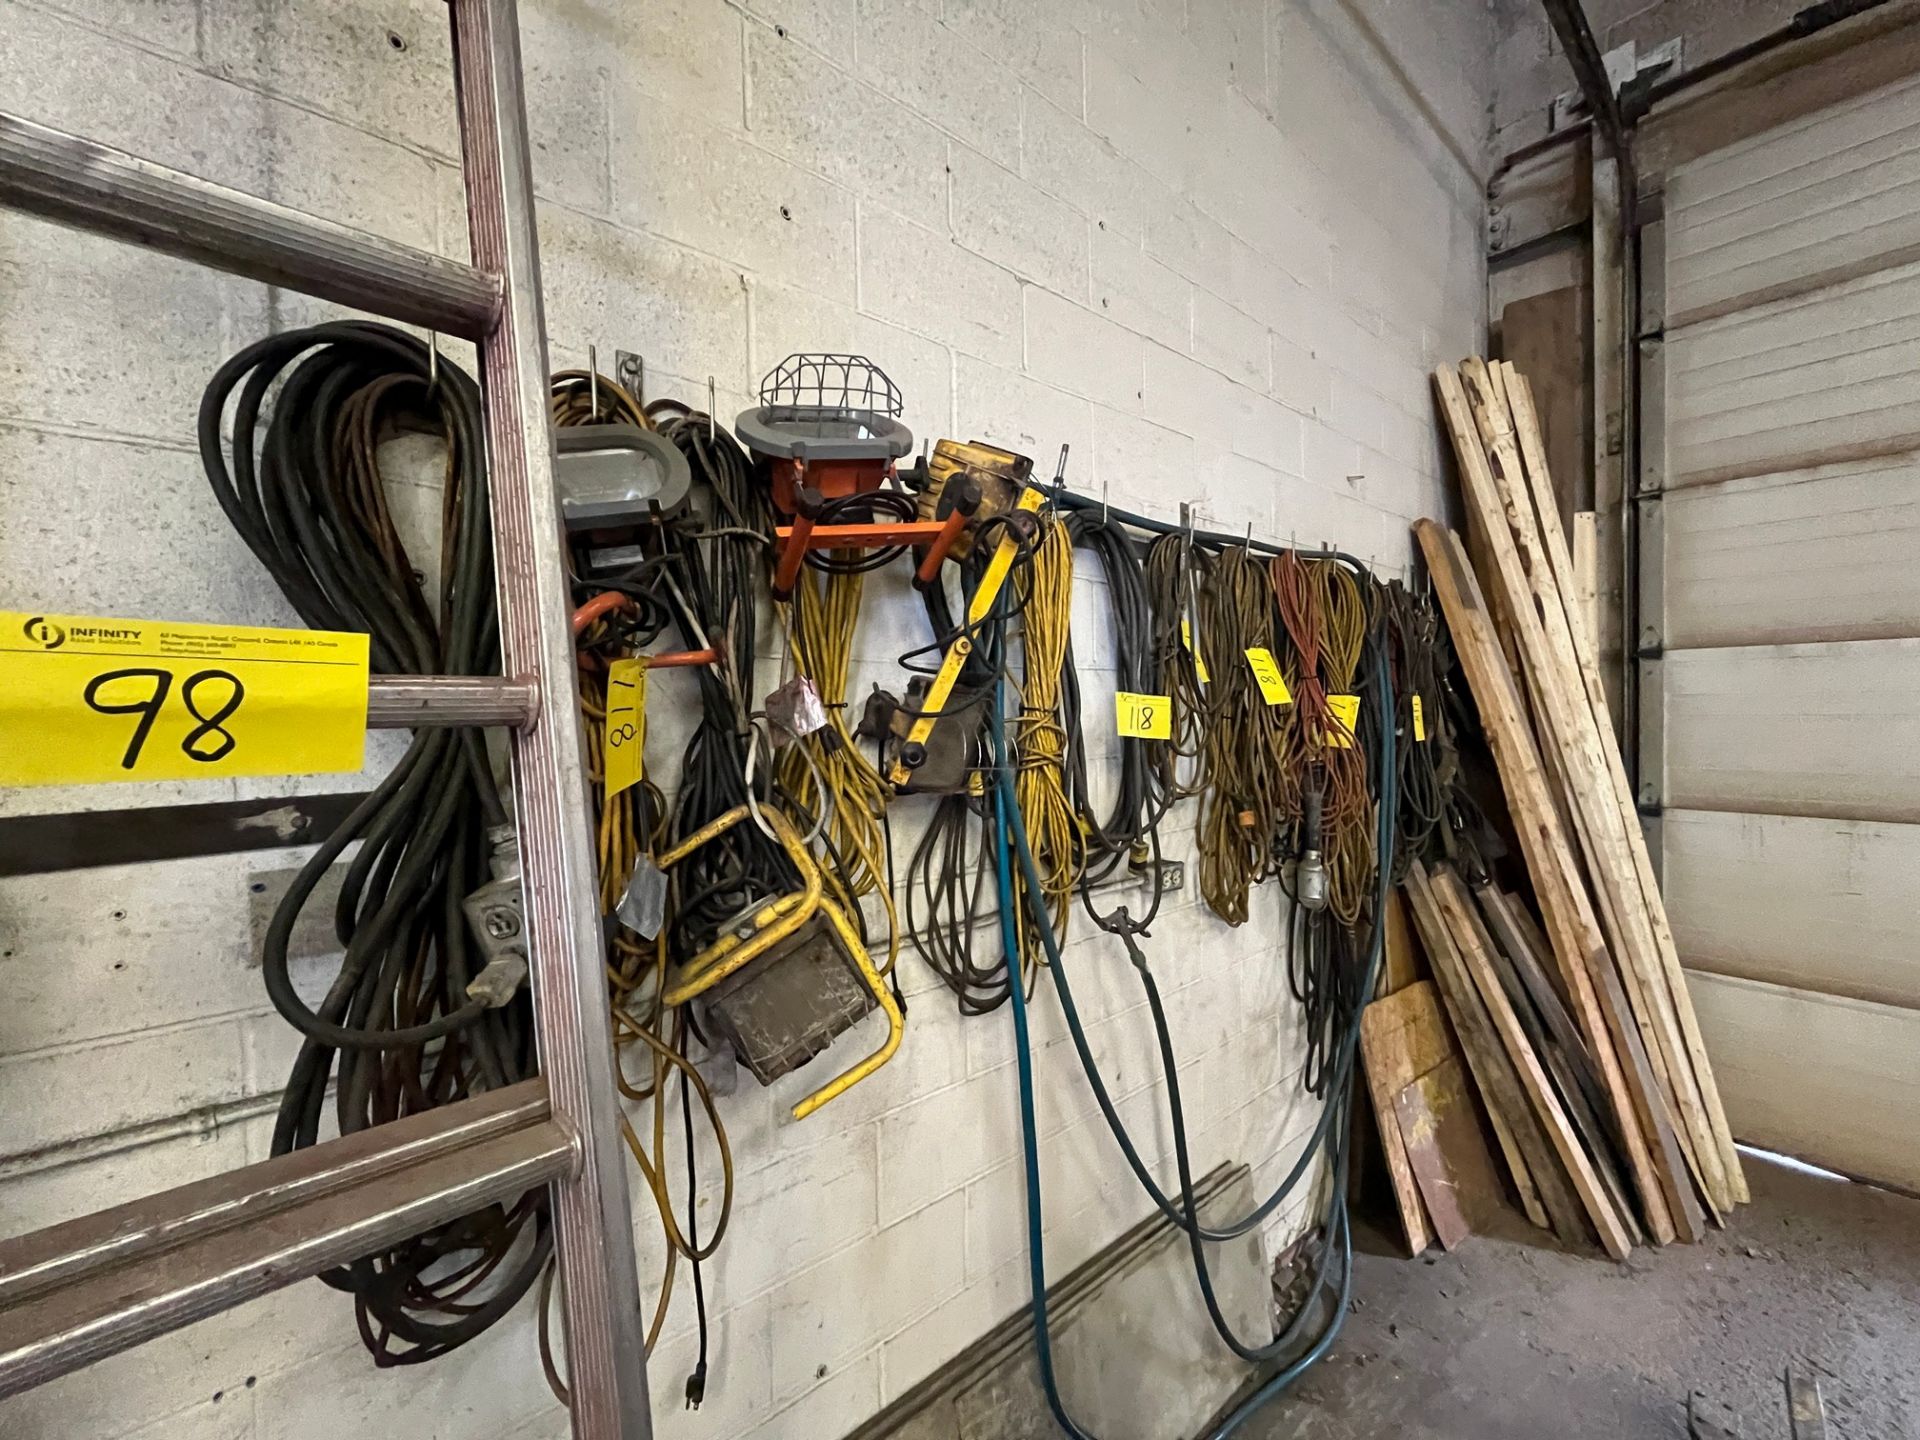 LOT OF HANGING EXTENSION CORDS AND RACK